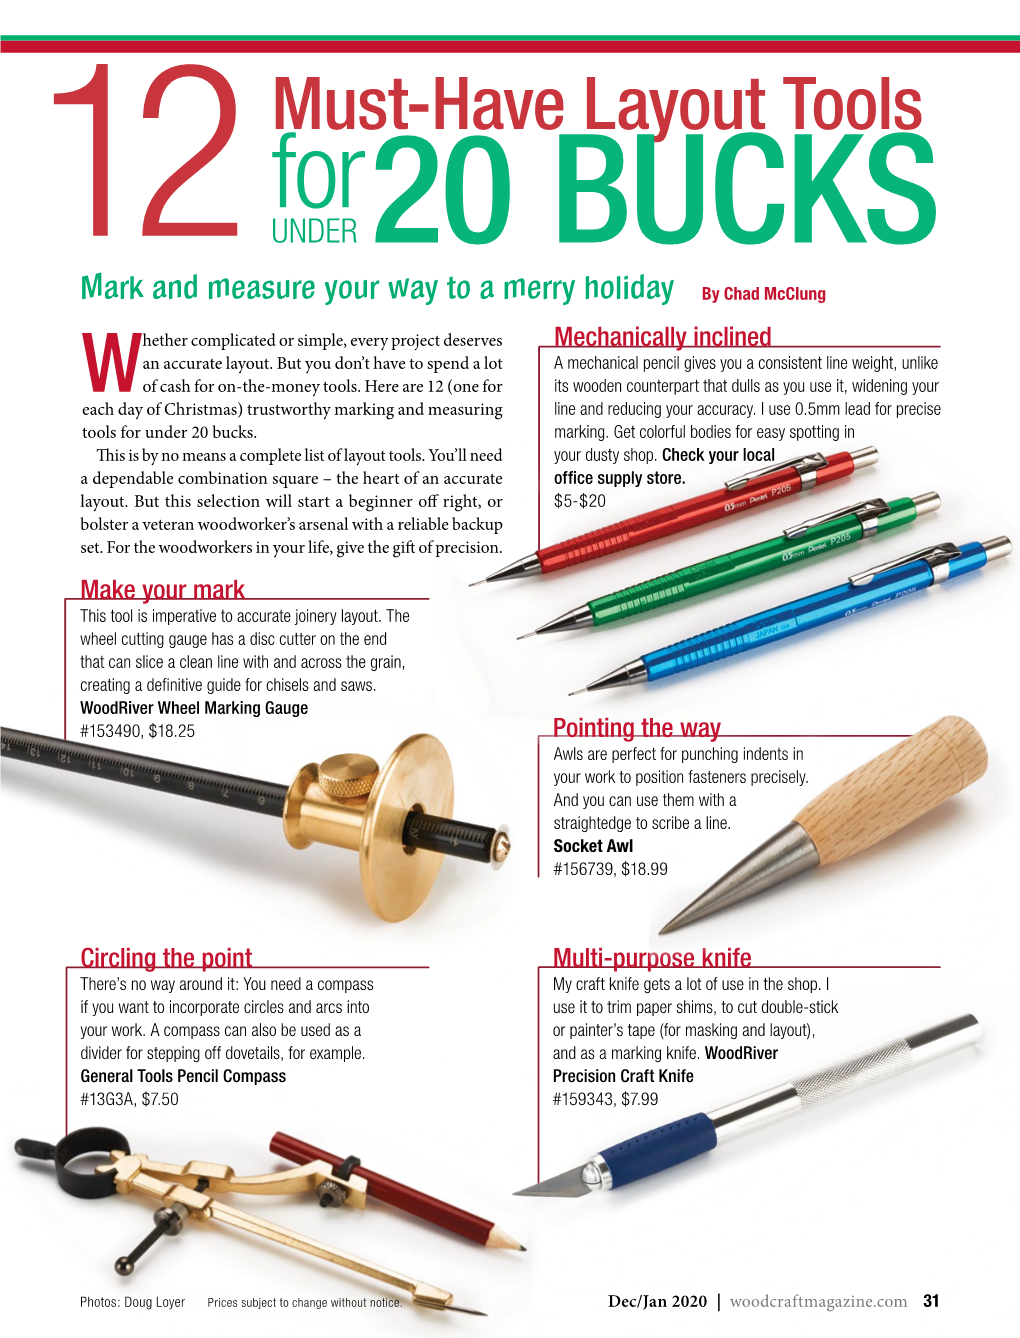 Must-Have Layout Tools for 12 UNDER 20 BUCKS Mark and Measure Your Way to a Merry Holiday by Chad Mcclung